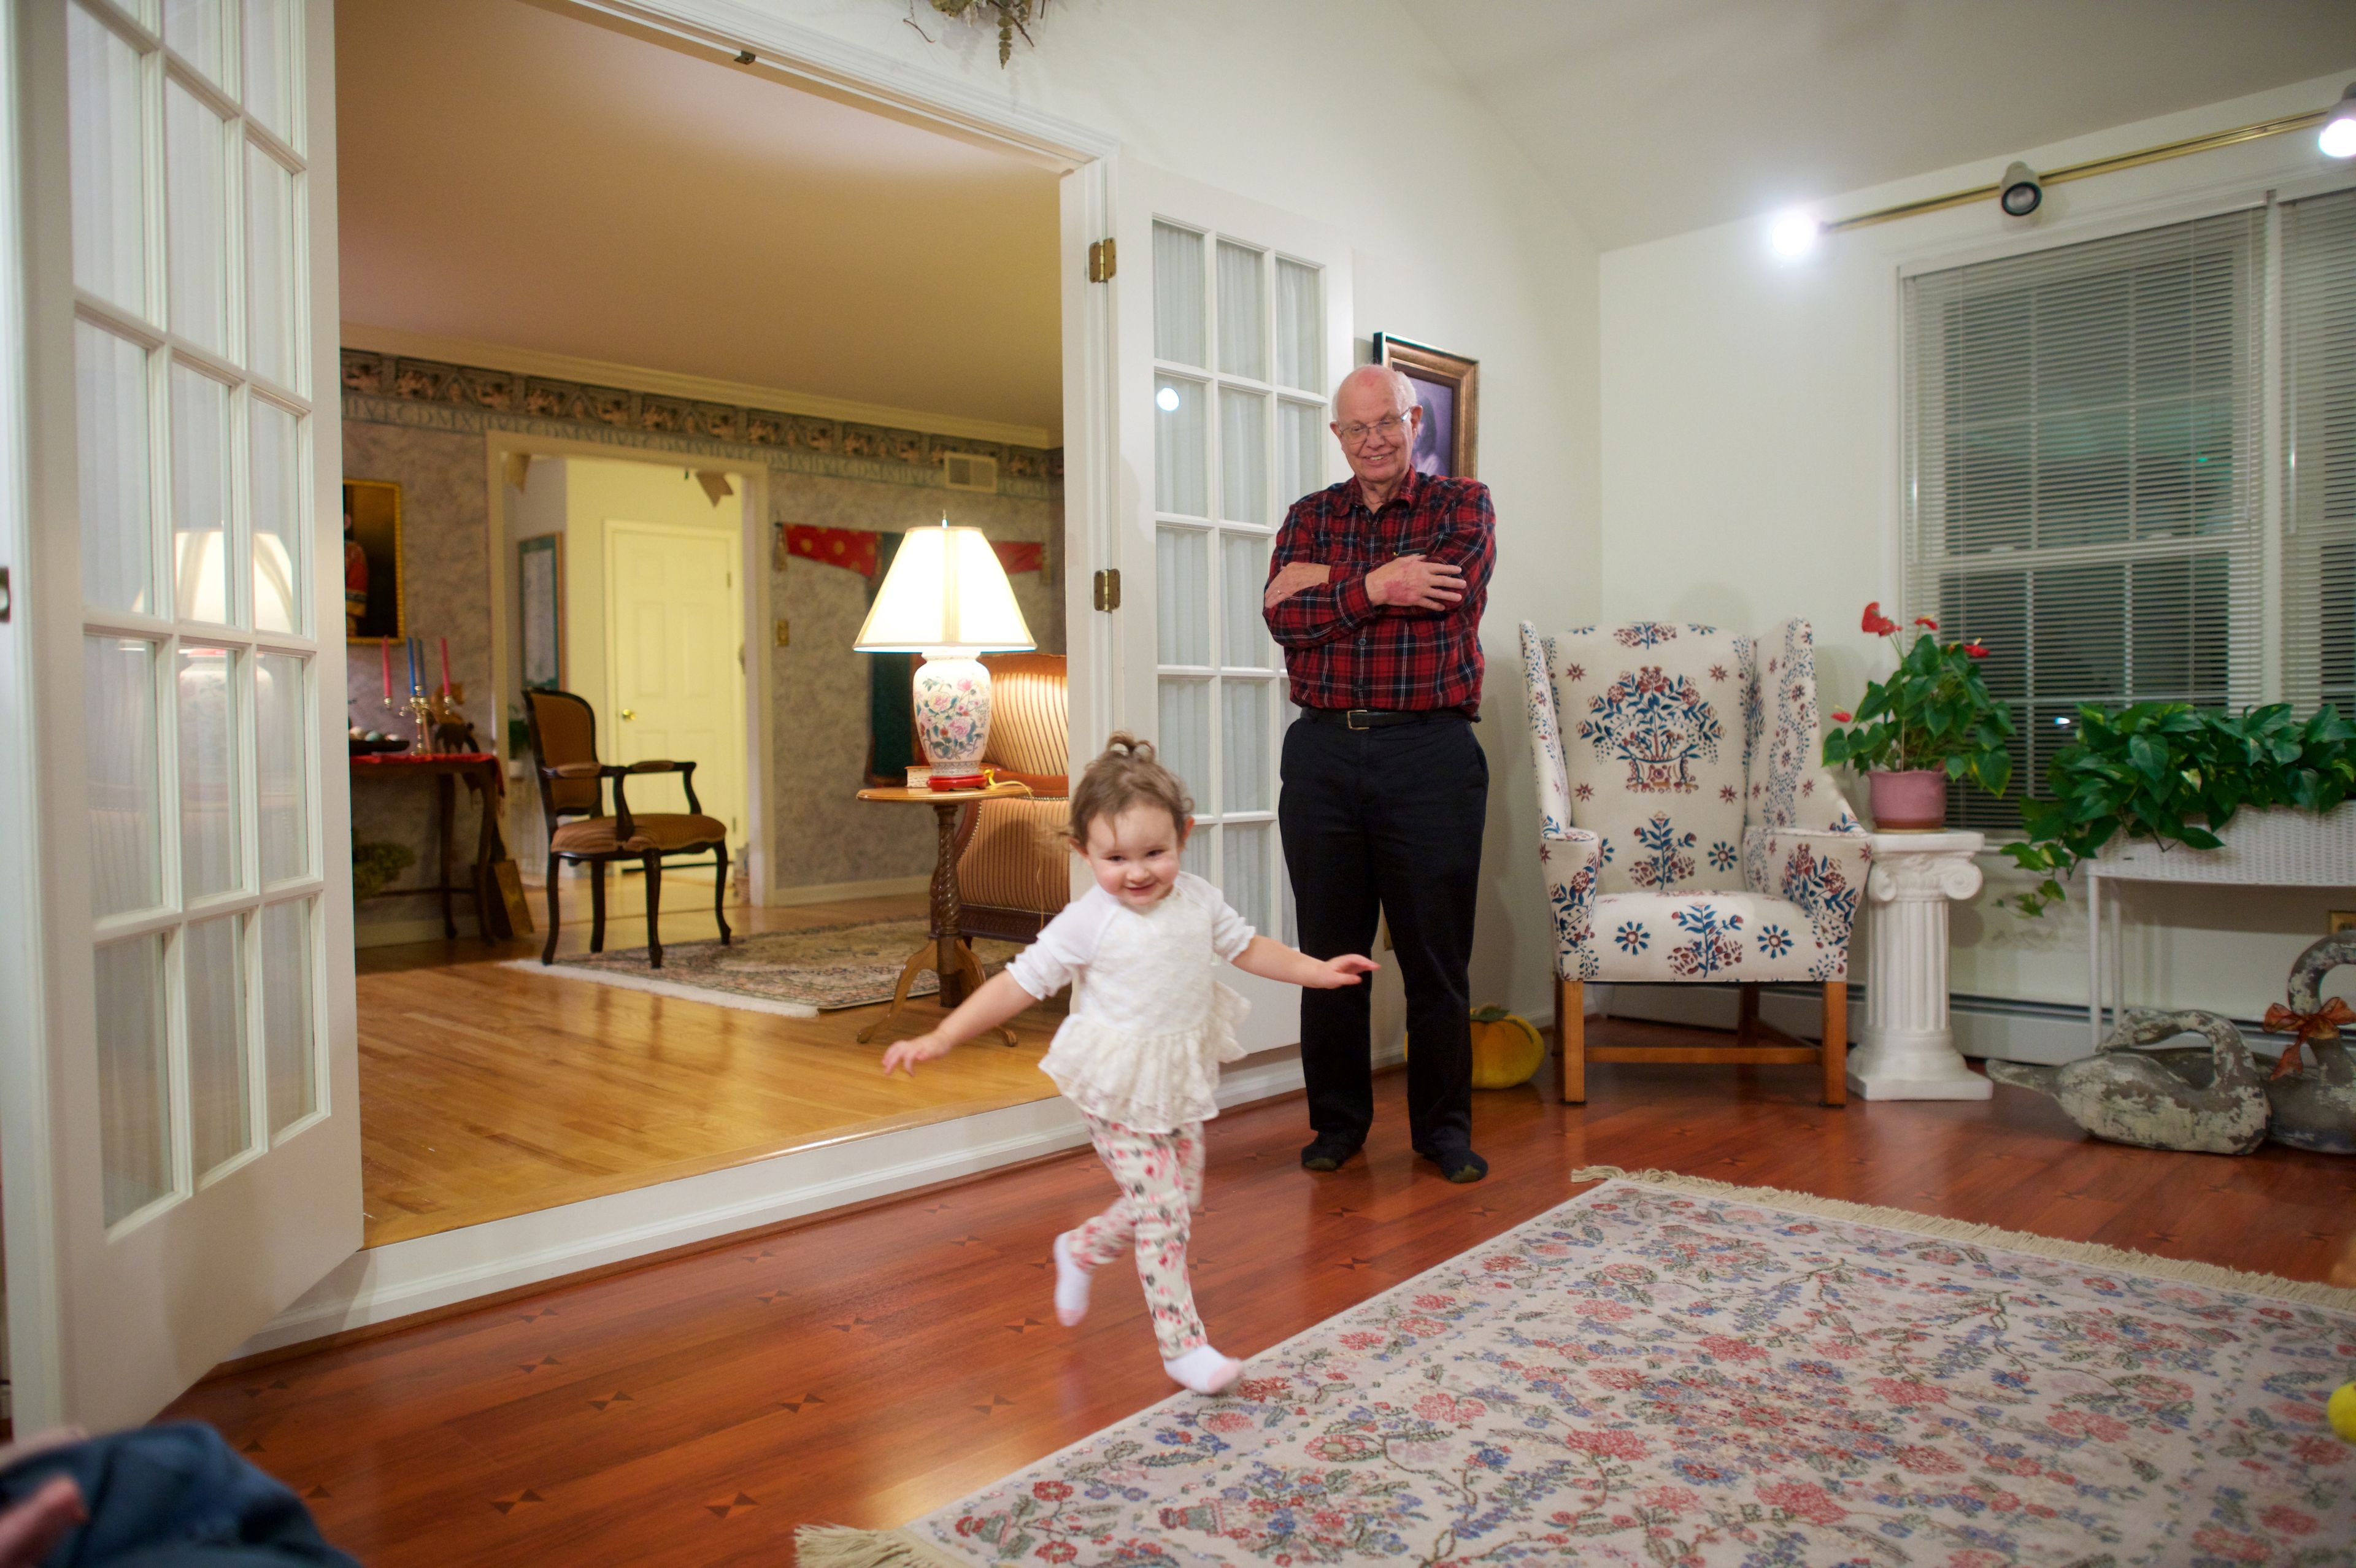 A grandfather in Pennsylvania watches over his dancing granddaughter.